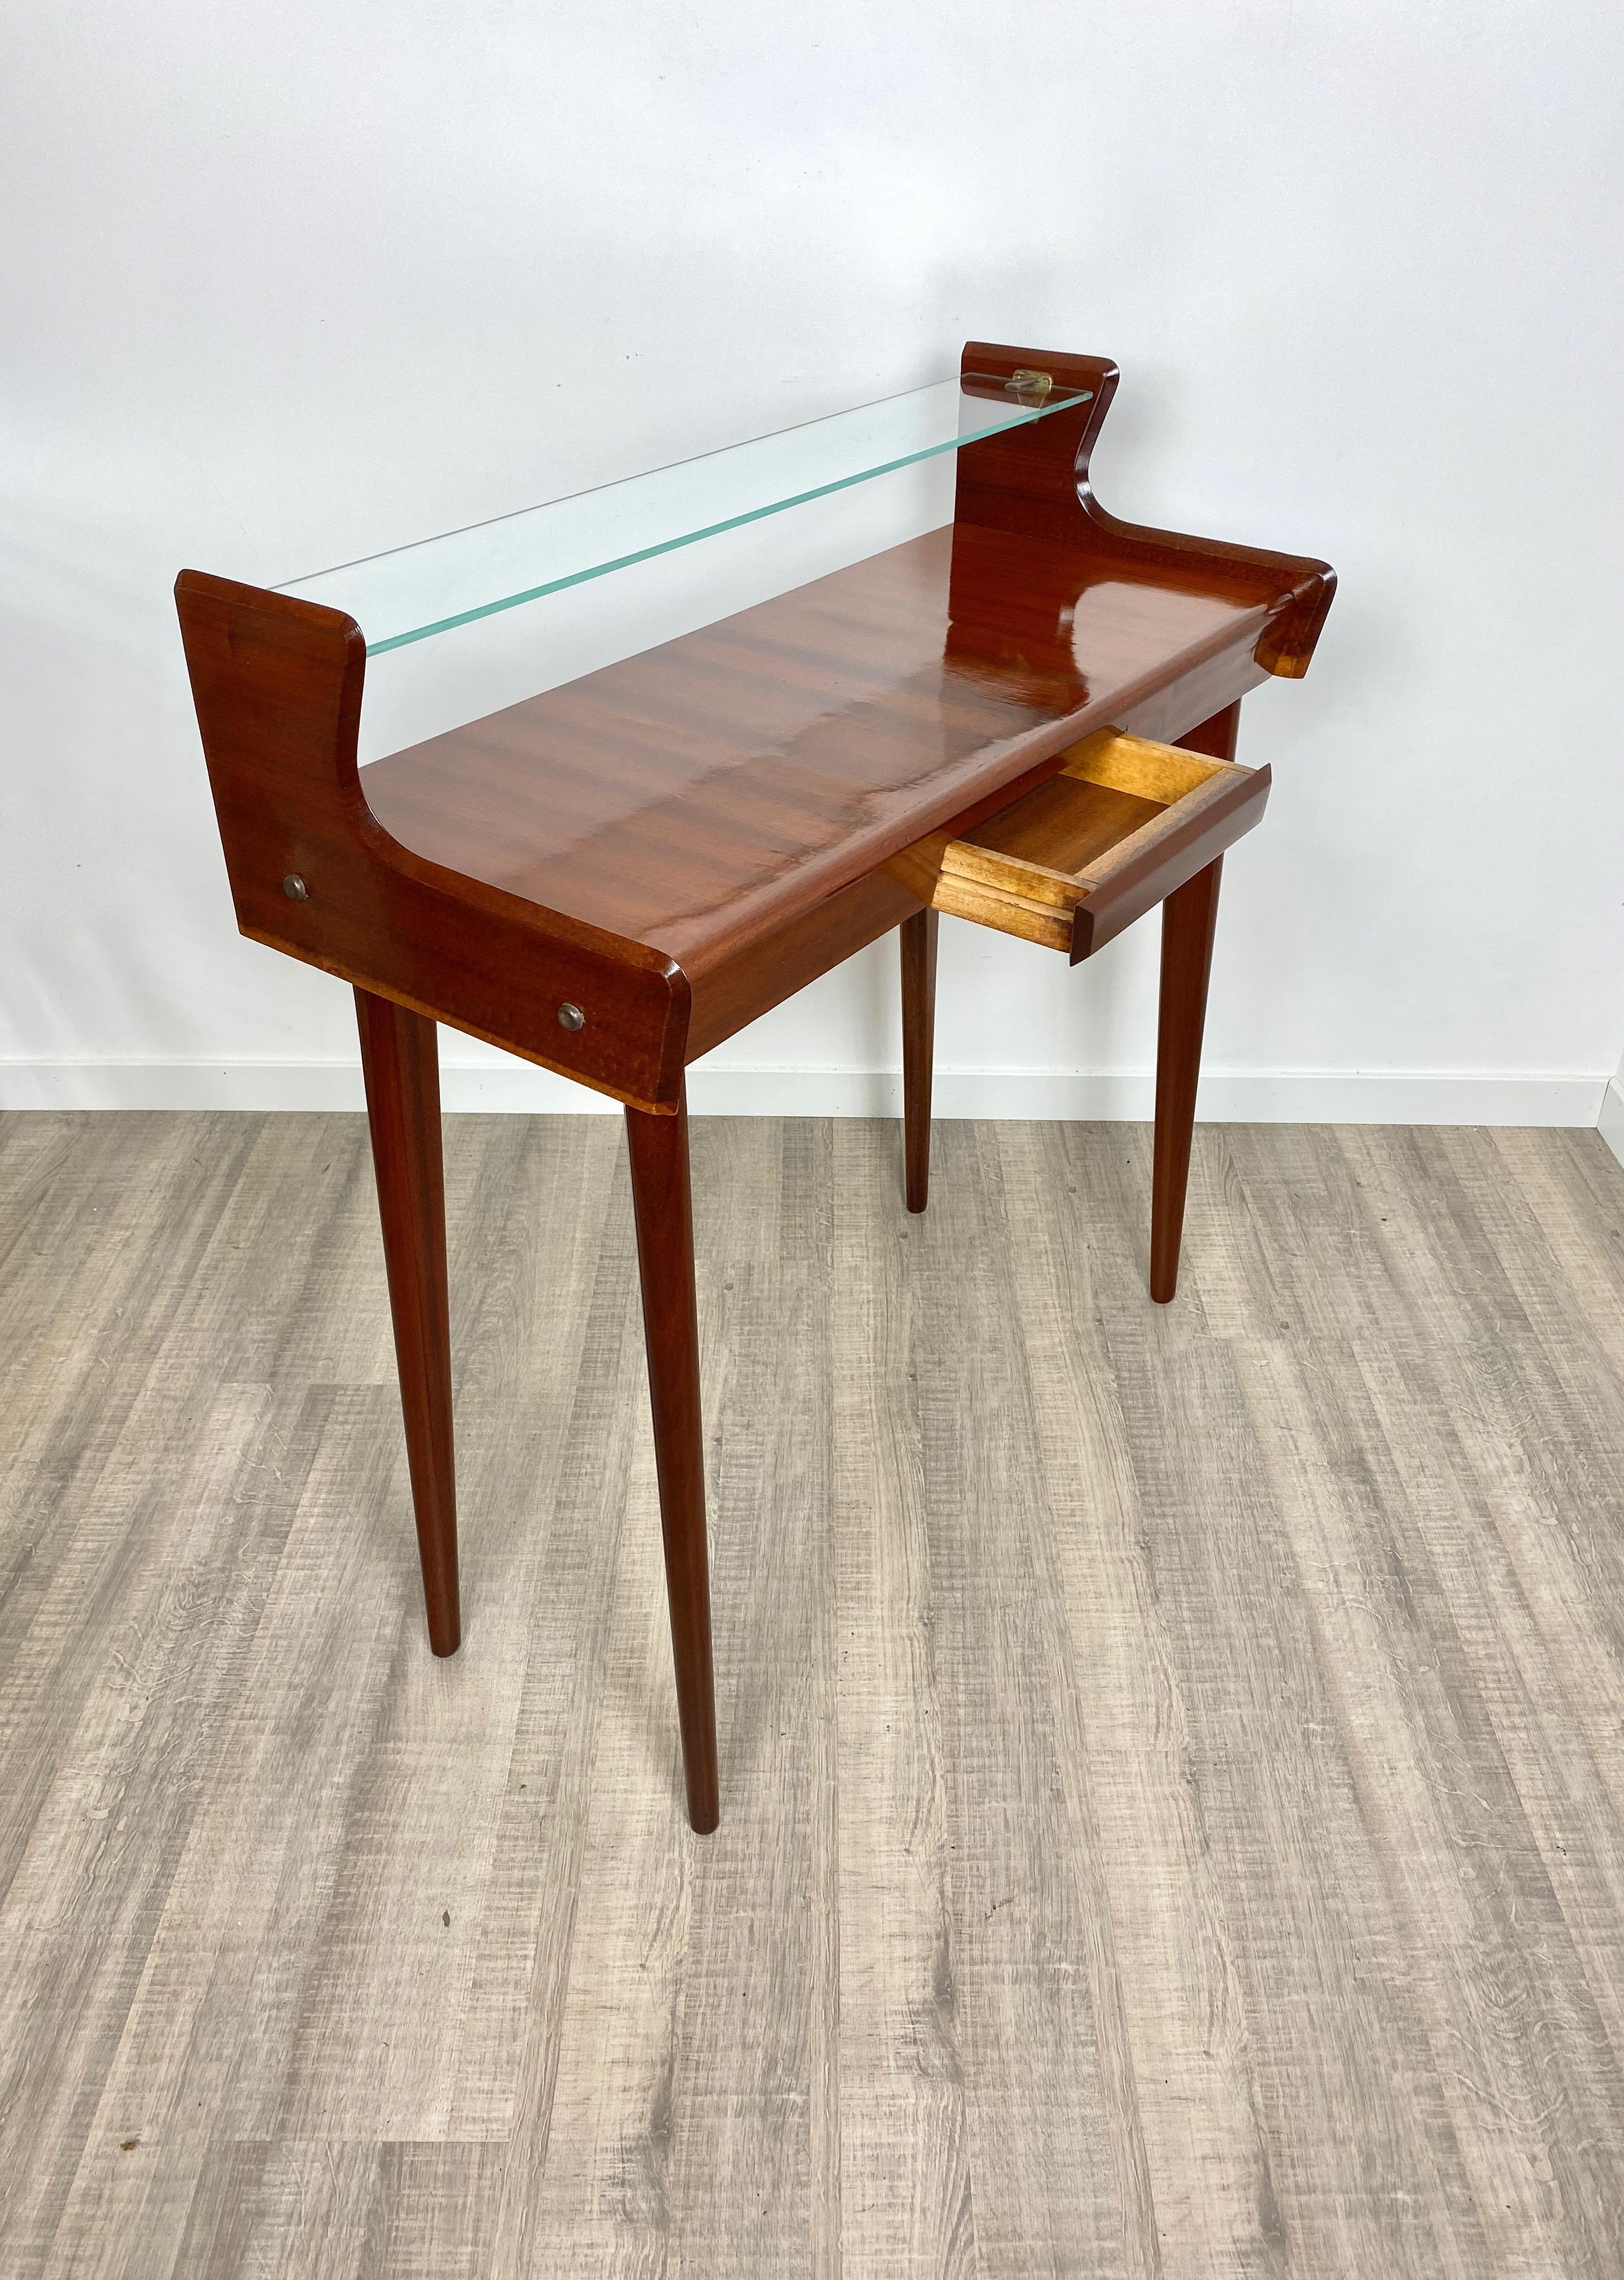 Brass Italian Midcentury Mahogany Wood and Glass Console Table by Carlo de Carli 1950s For Sale